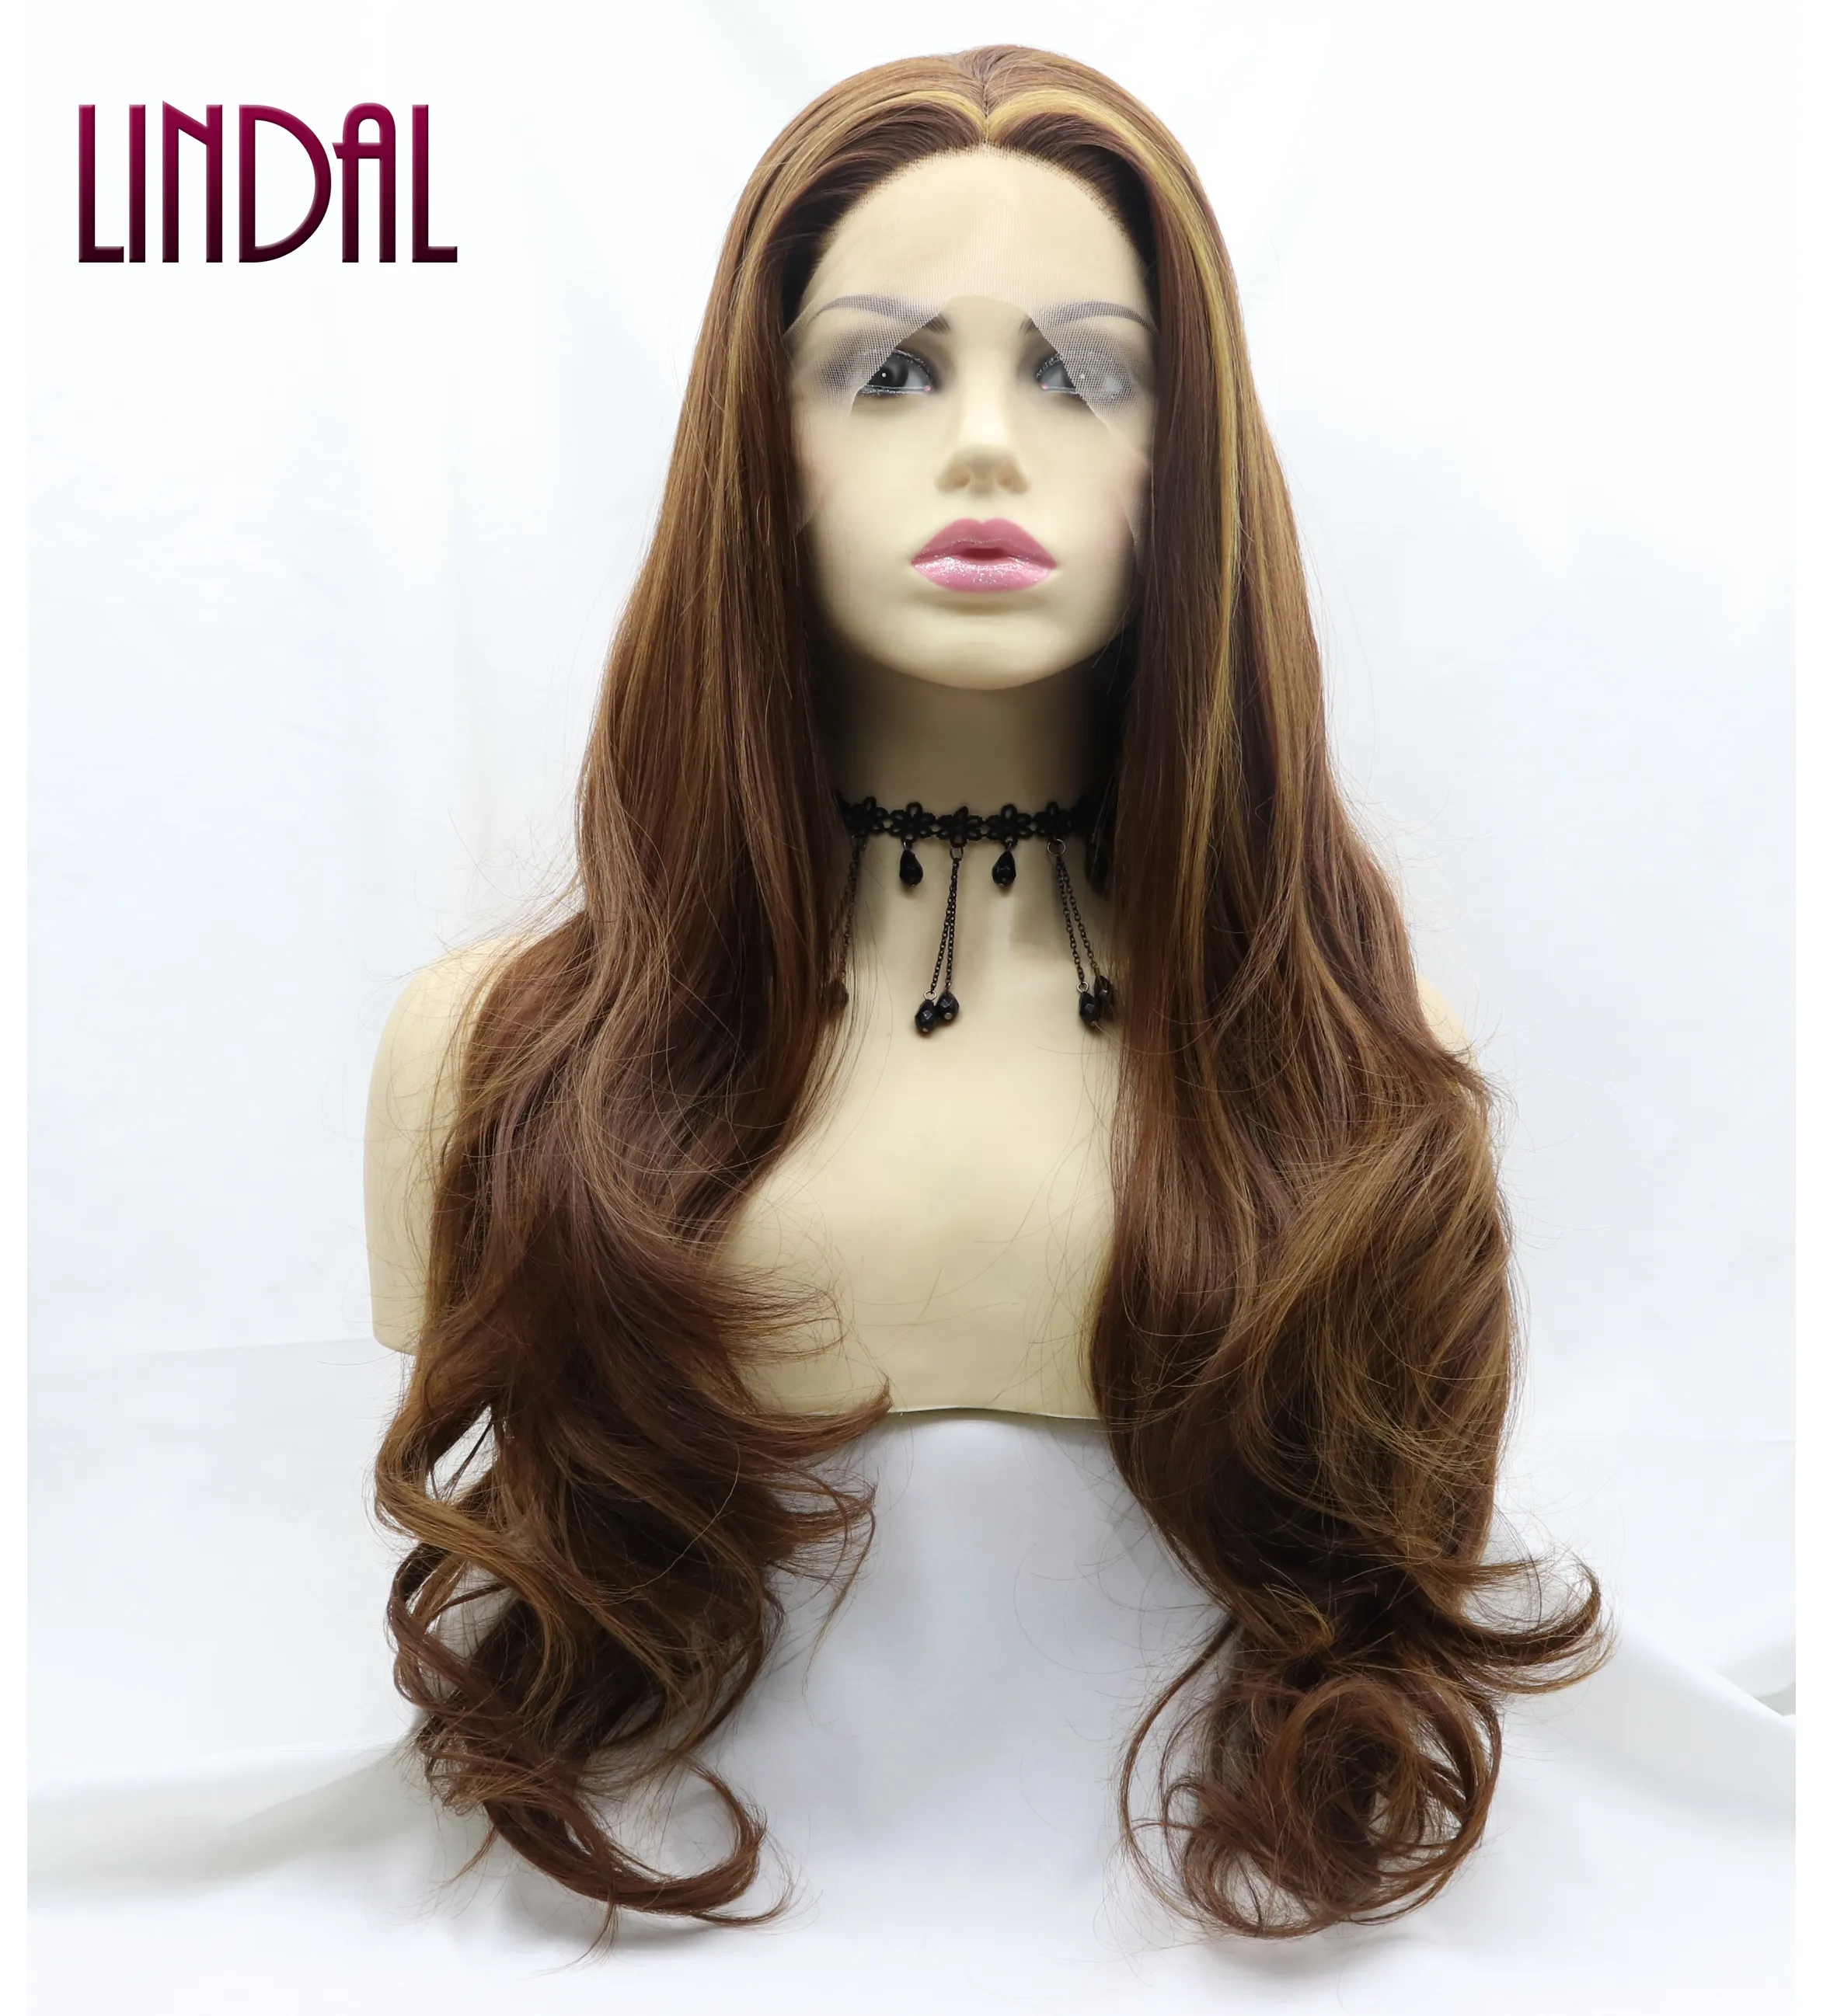 LINDAL ladies synthetic wigs afro curly body wave wig synthetic lace front wig vendor color